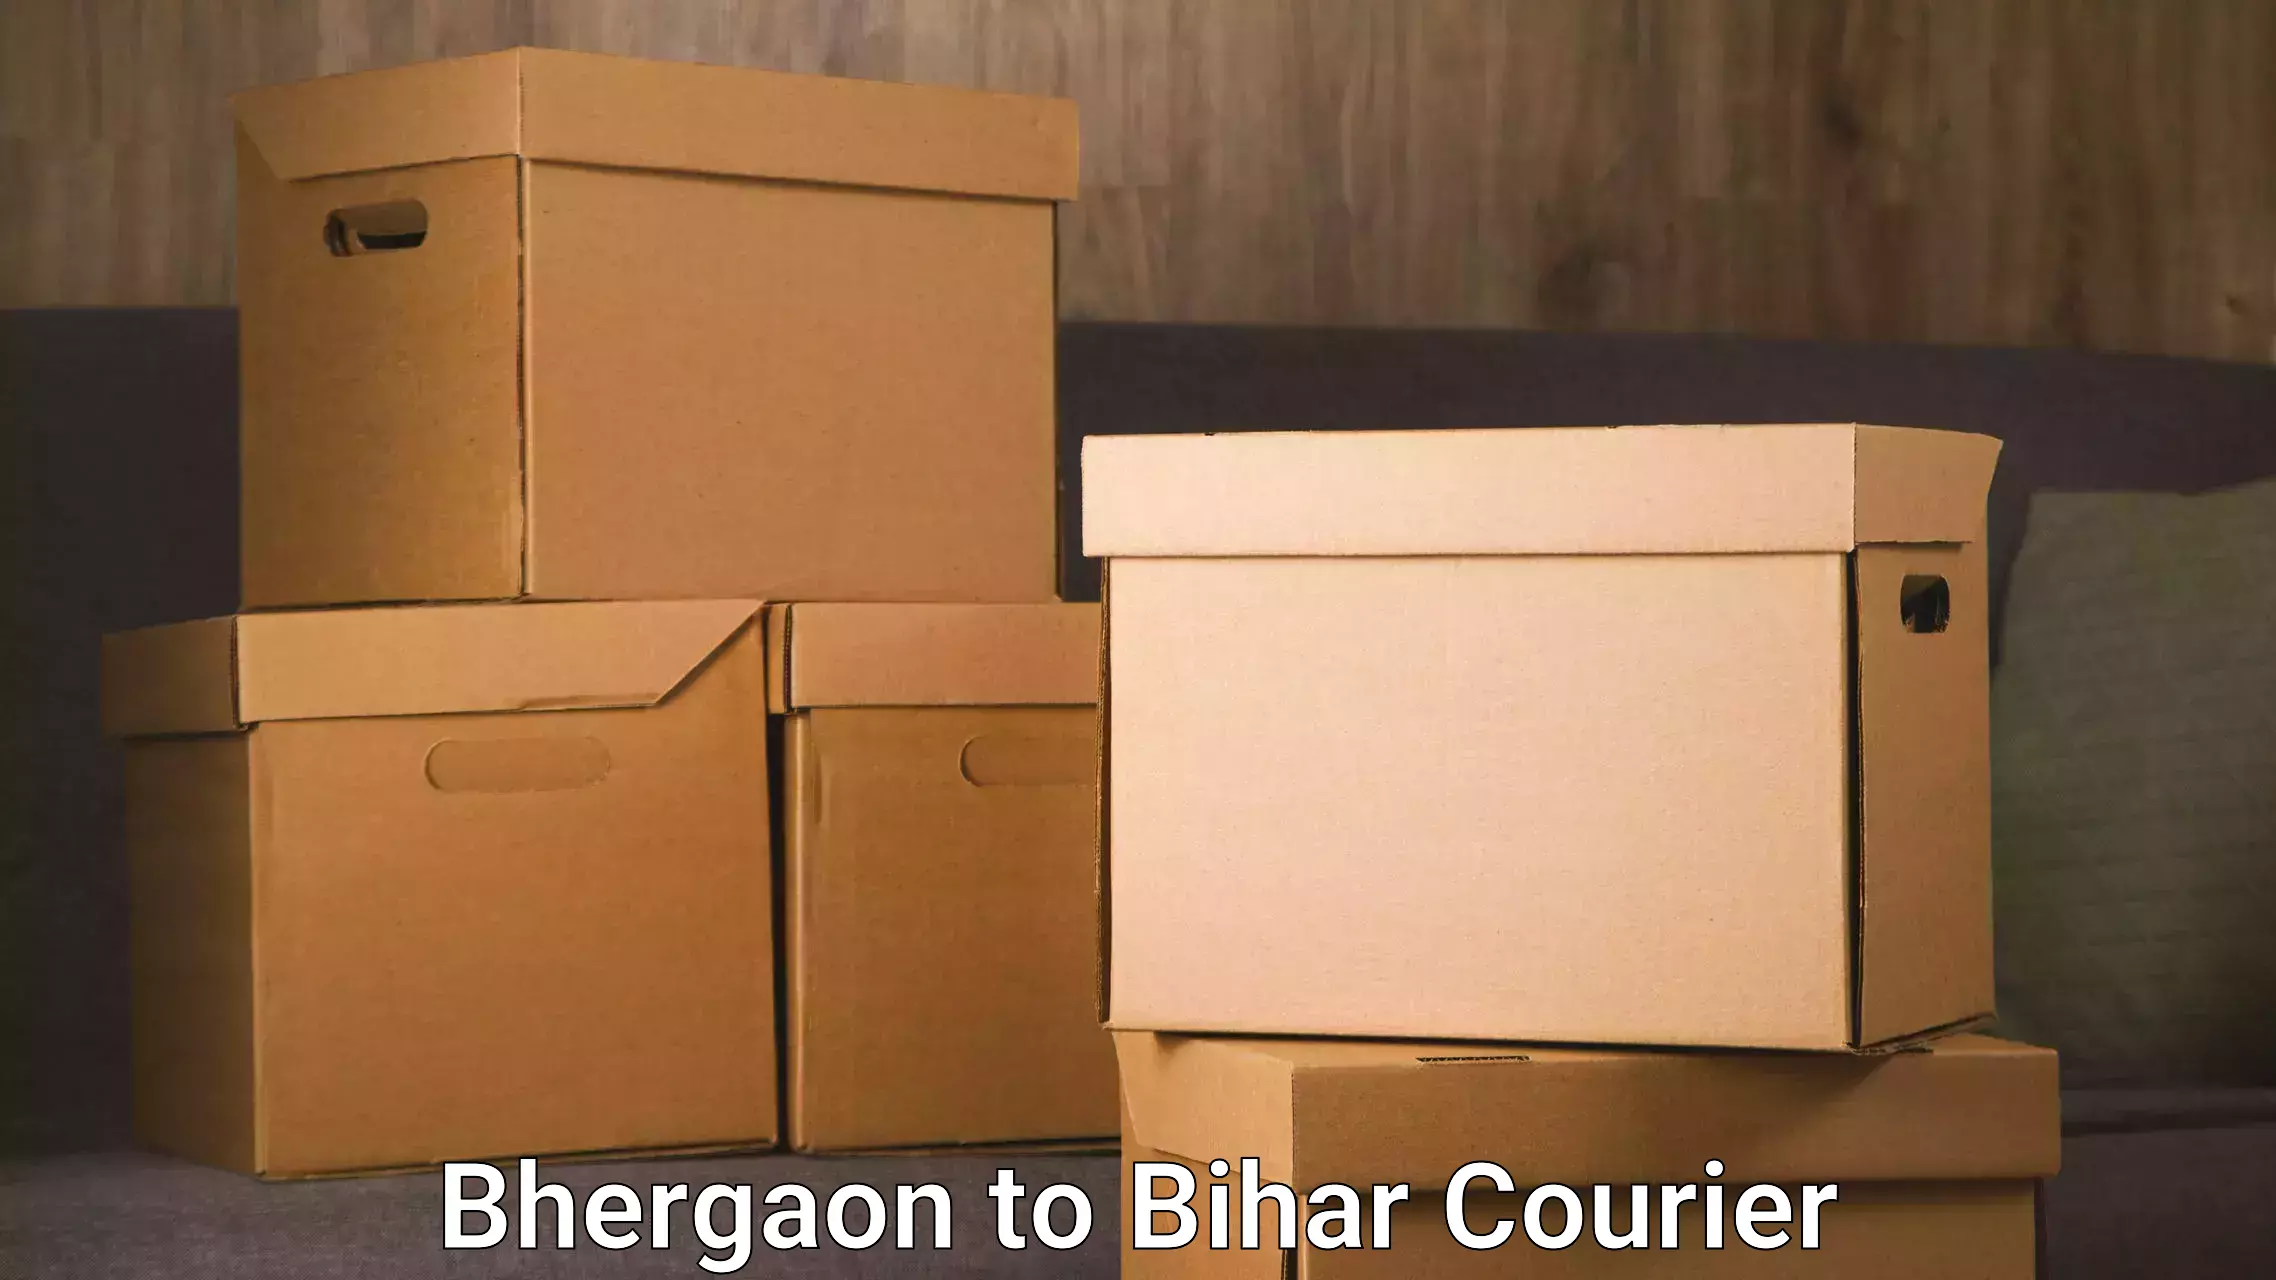 Express delivery capabilities Bhergaon to Bihar